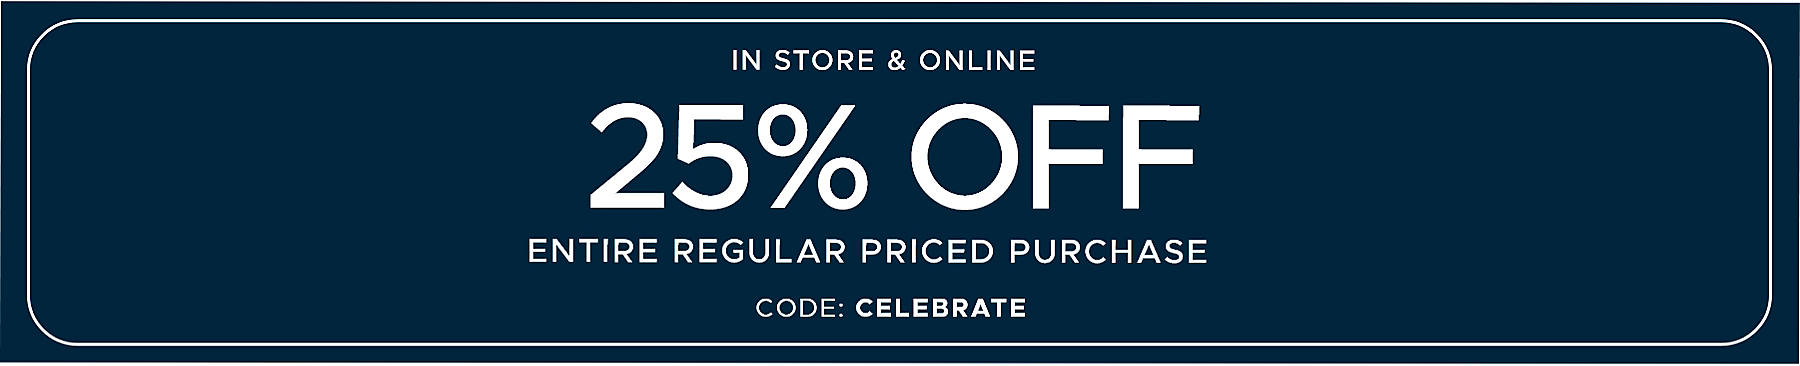 25% off Entire Regular Priced Purchase code: CELEBRATE